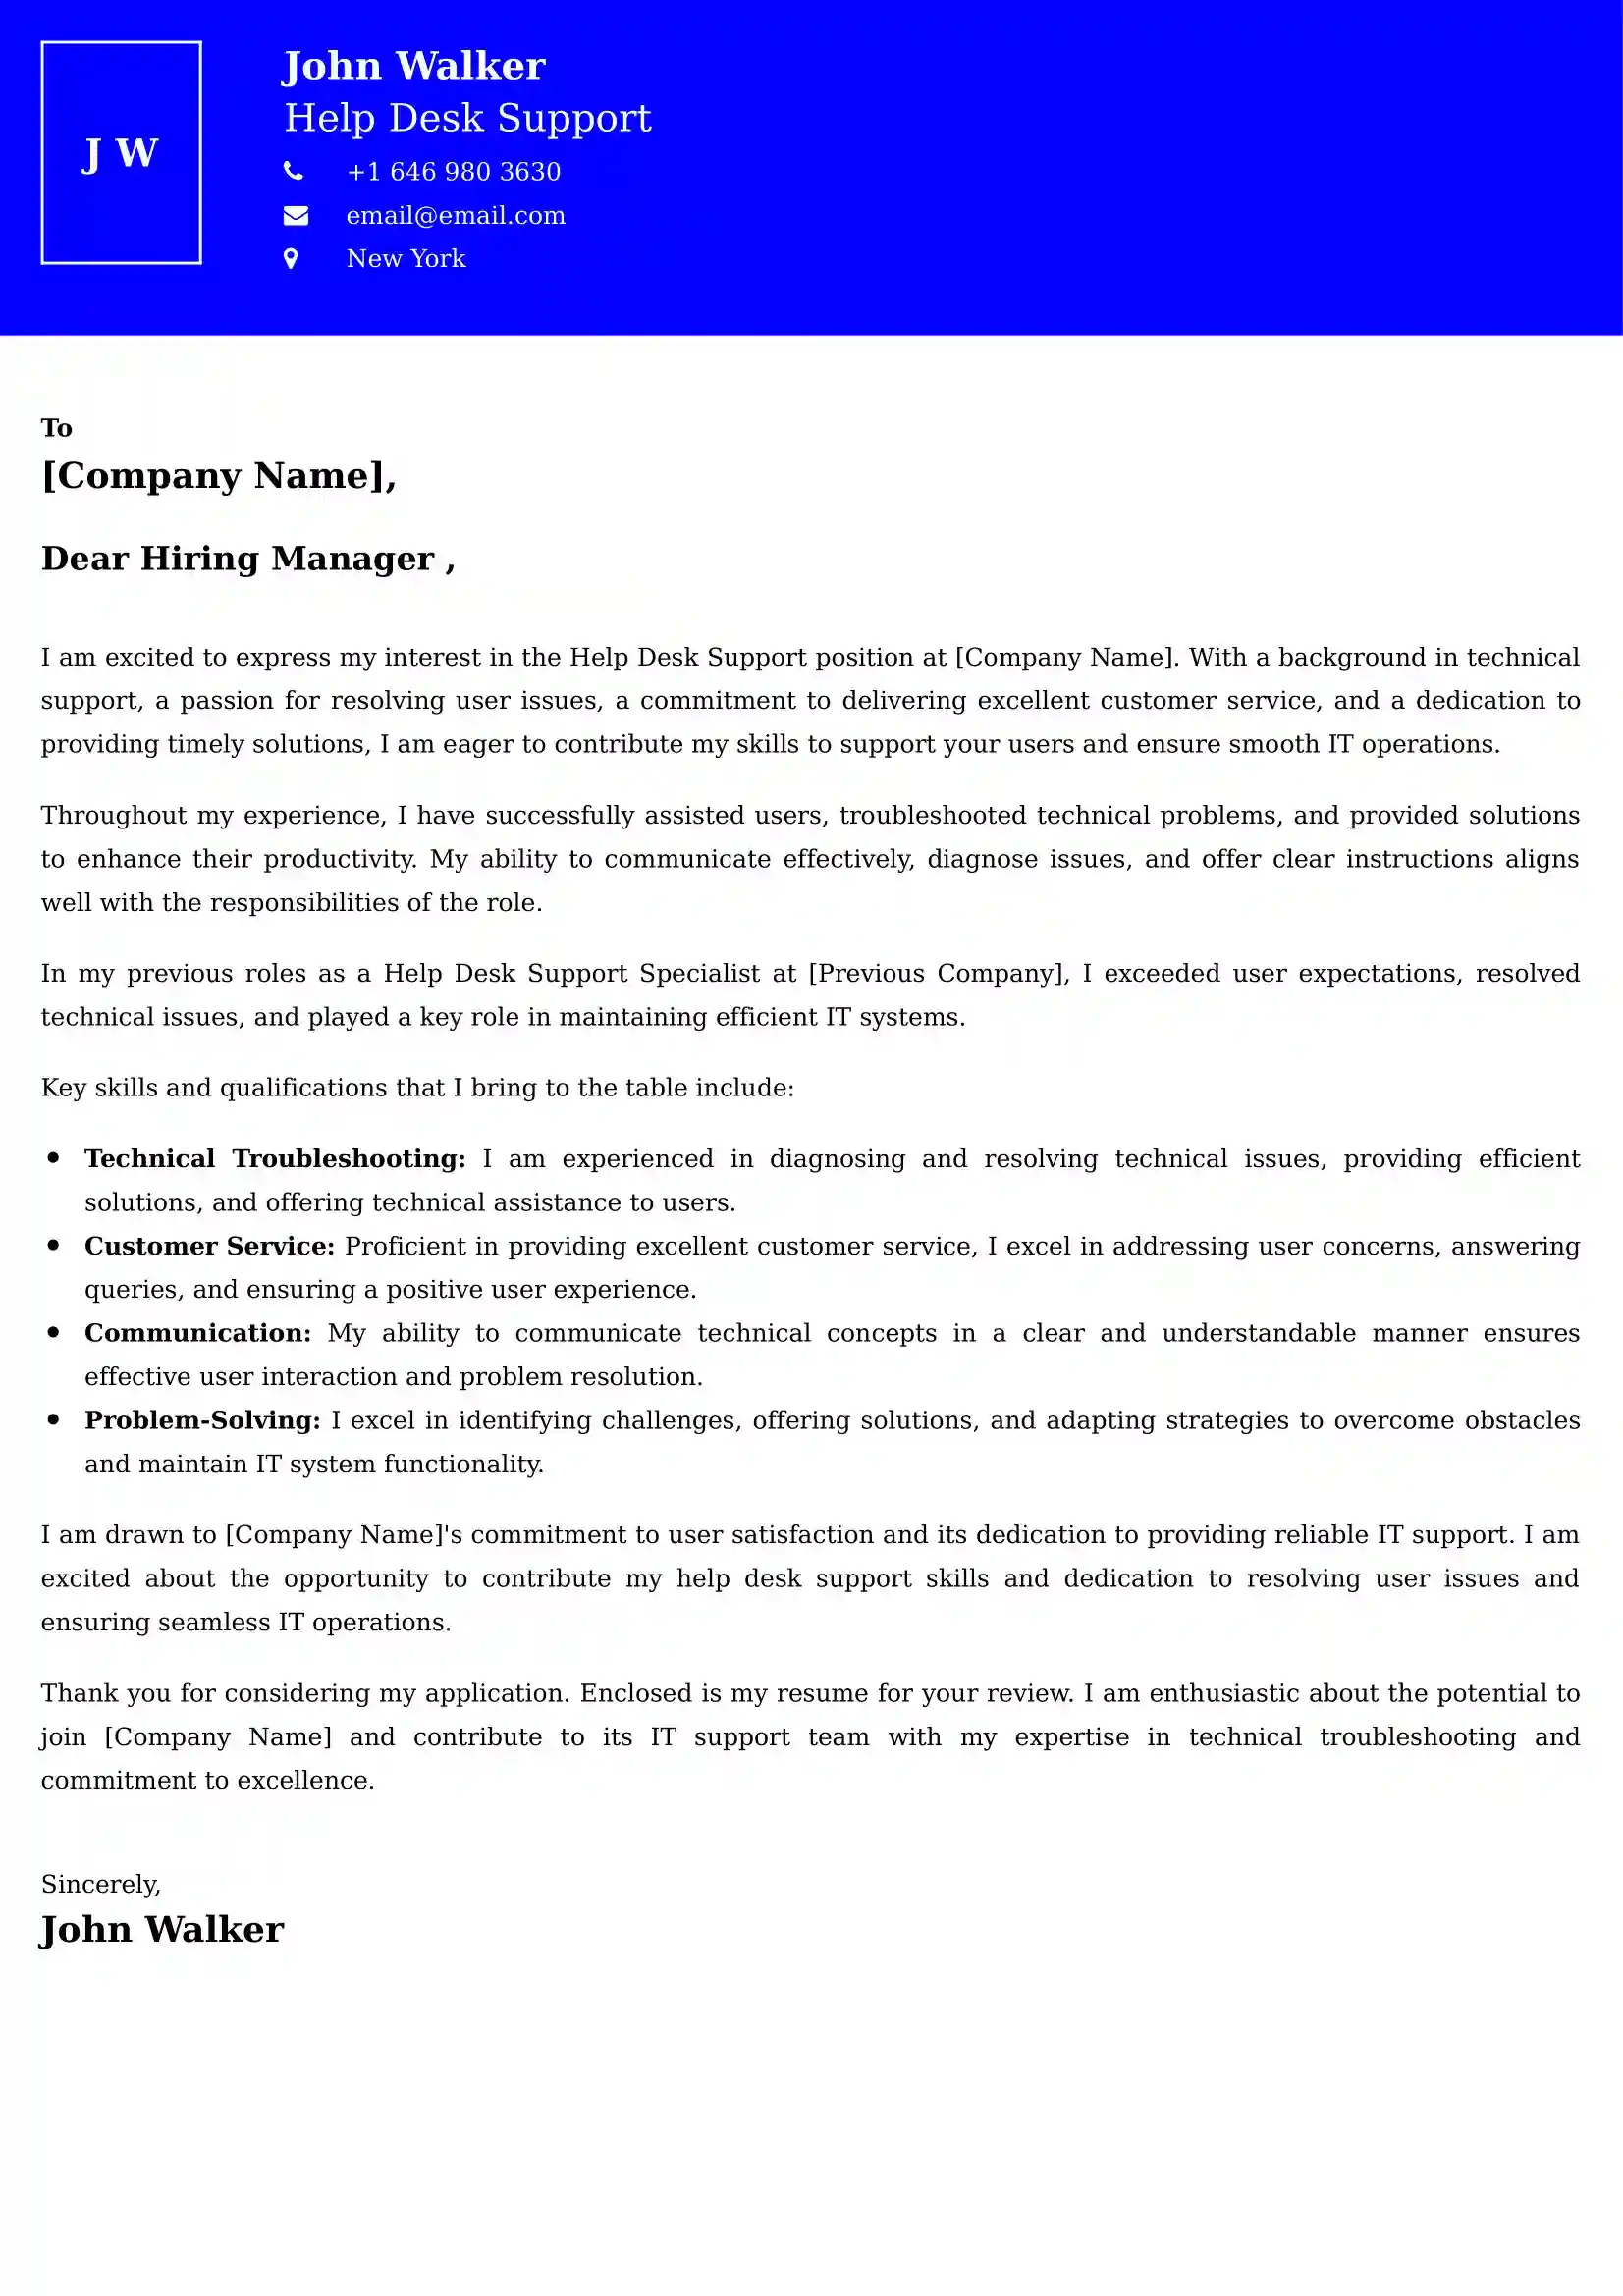 Help Desk Support Cover Letter Examples - Latest UK Format